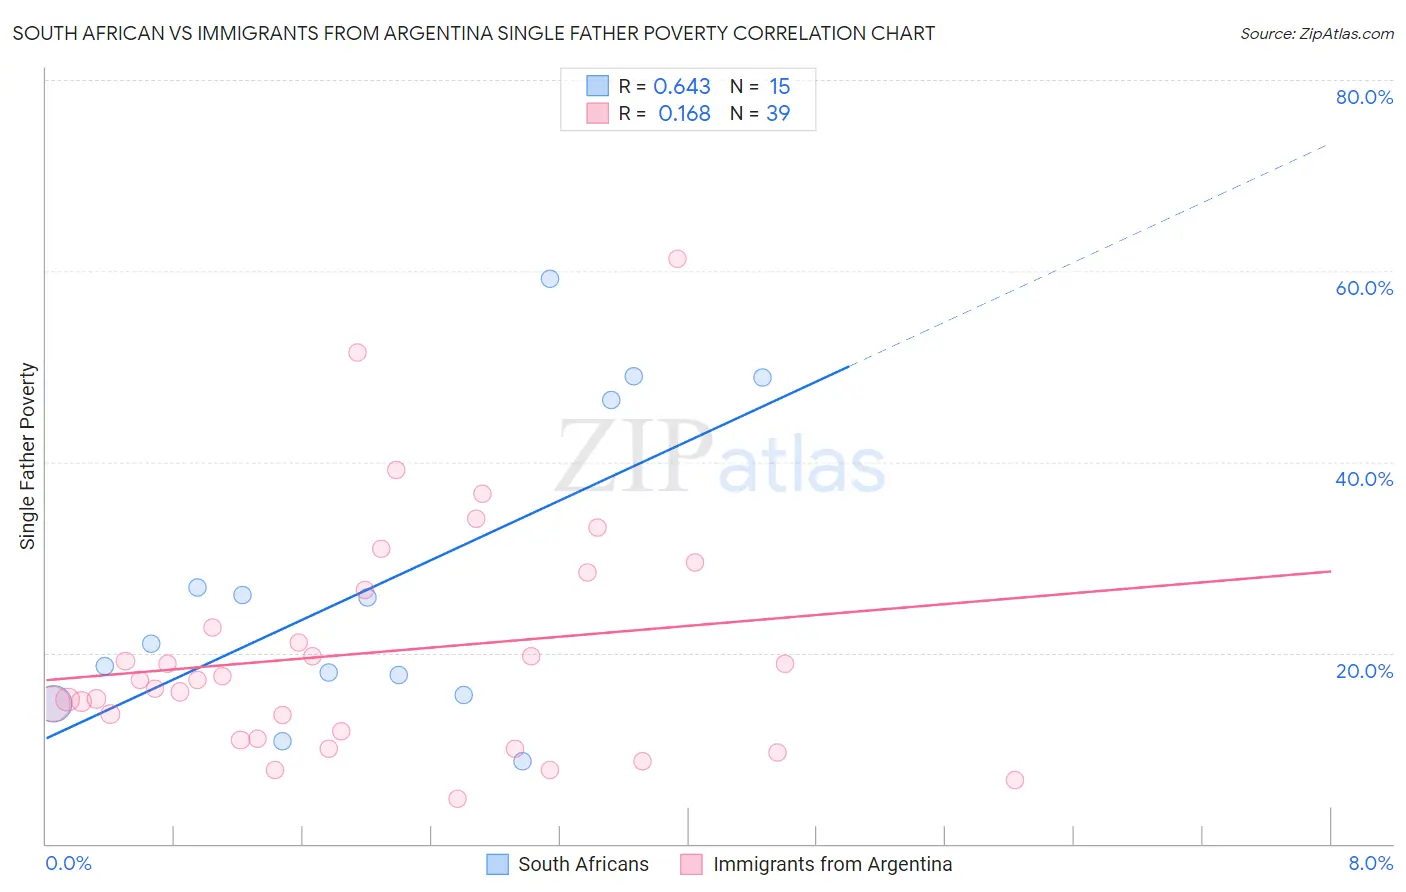 South African vs Immigrants from Argentina Single Father Poverty